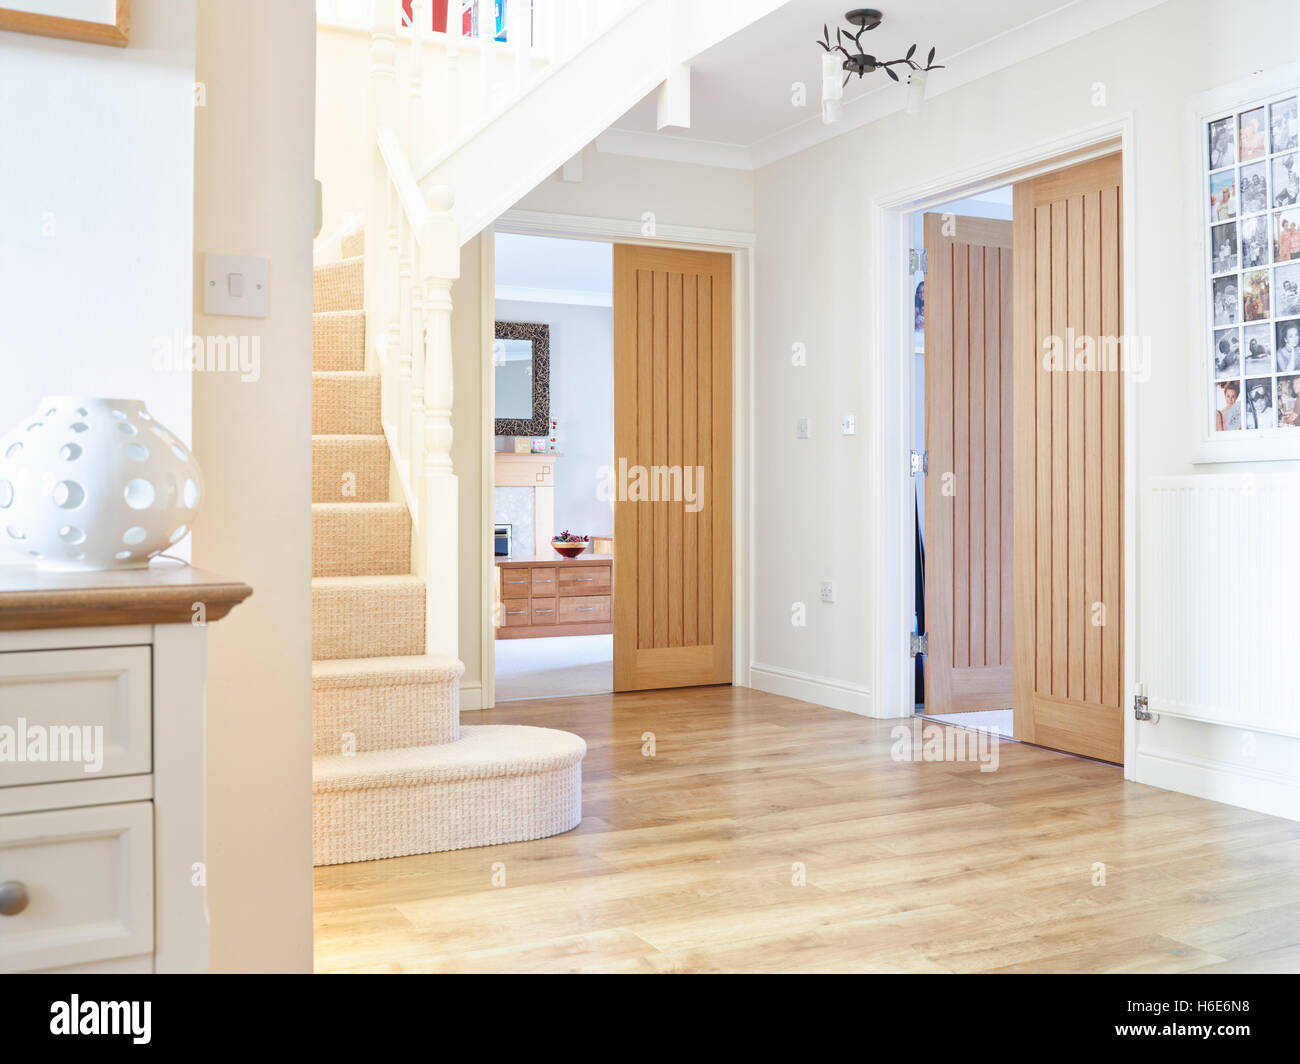 The entrance hallway of a contemporary UK home showing the connection & layout of the adjoining rooms Stock Photo